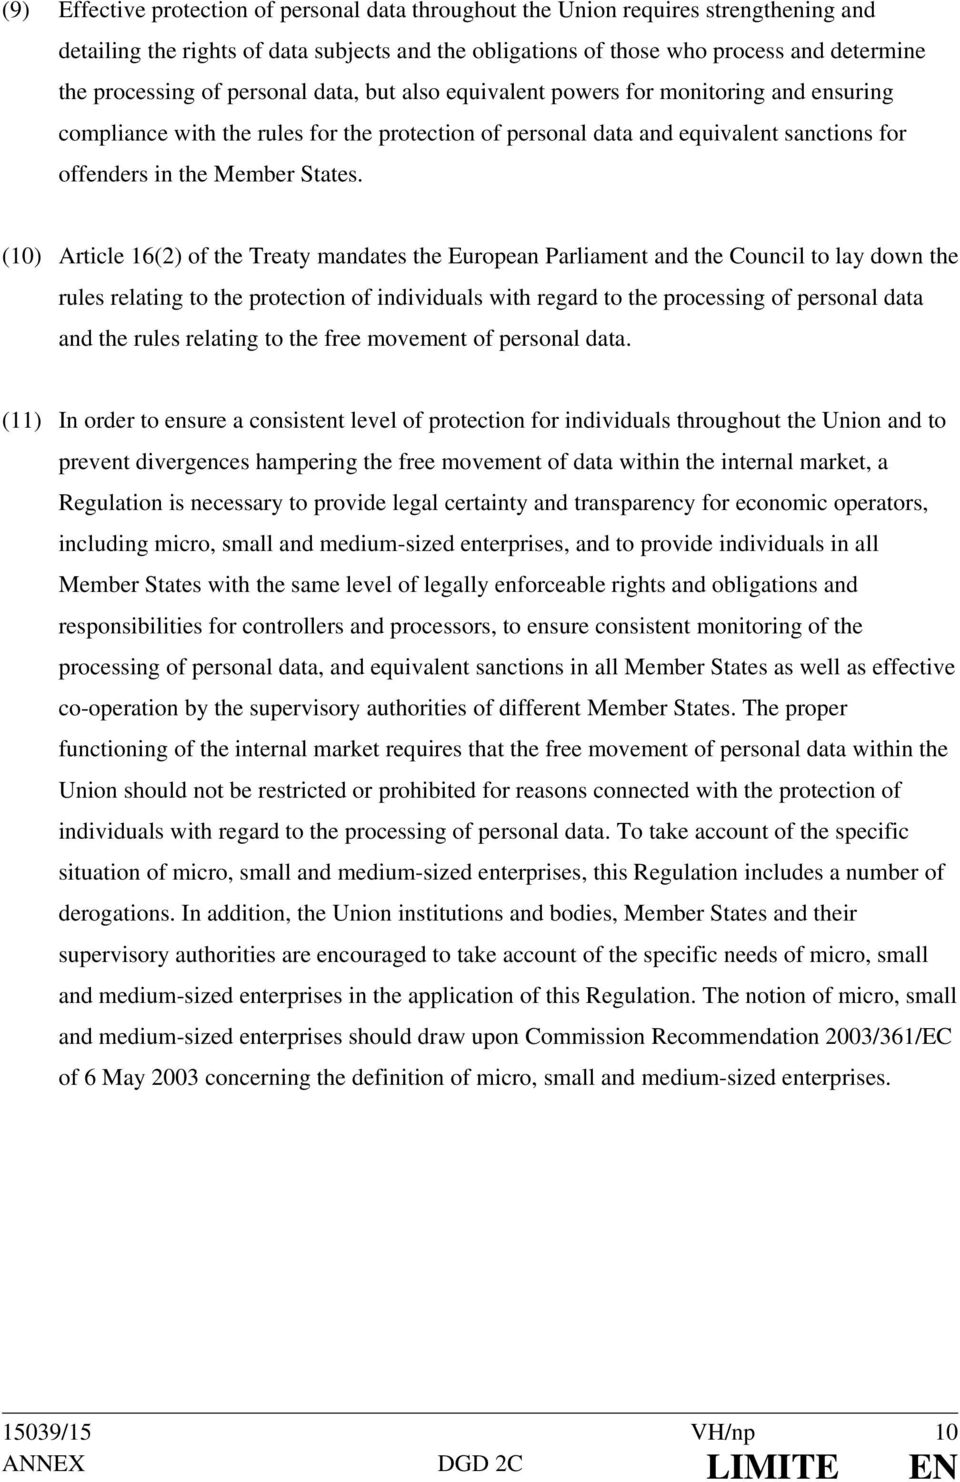 (10) Article 16(2) of the Treaty mandates the European Parliament and the Council to lay down the rules relating to the protection of individuals with regard to the processing of personal data and